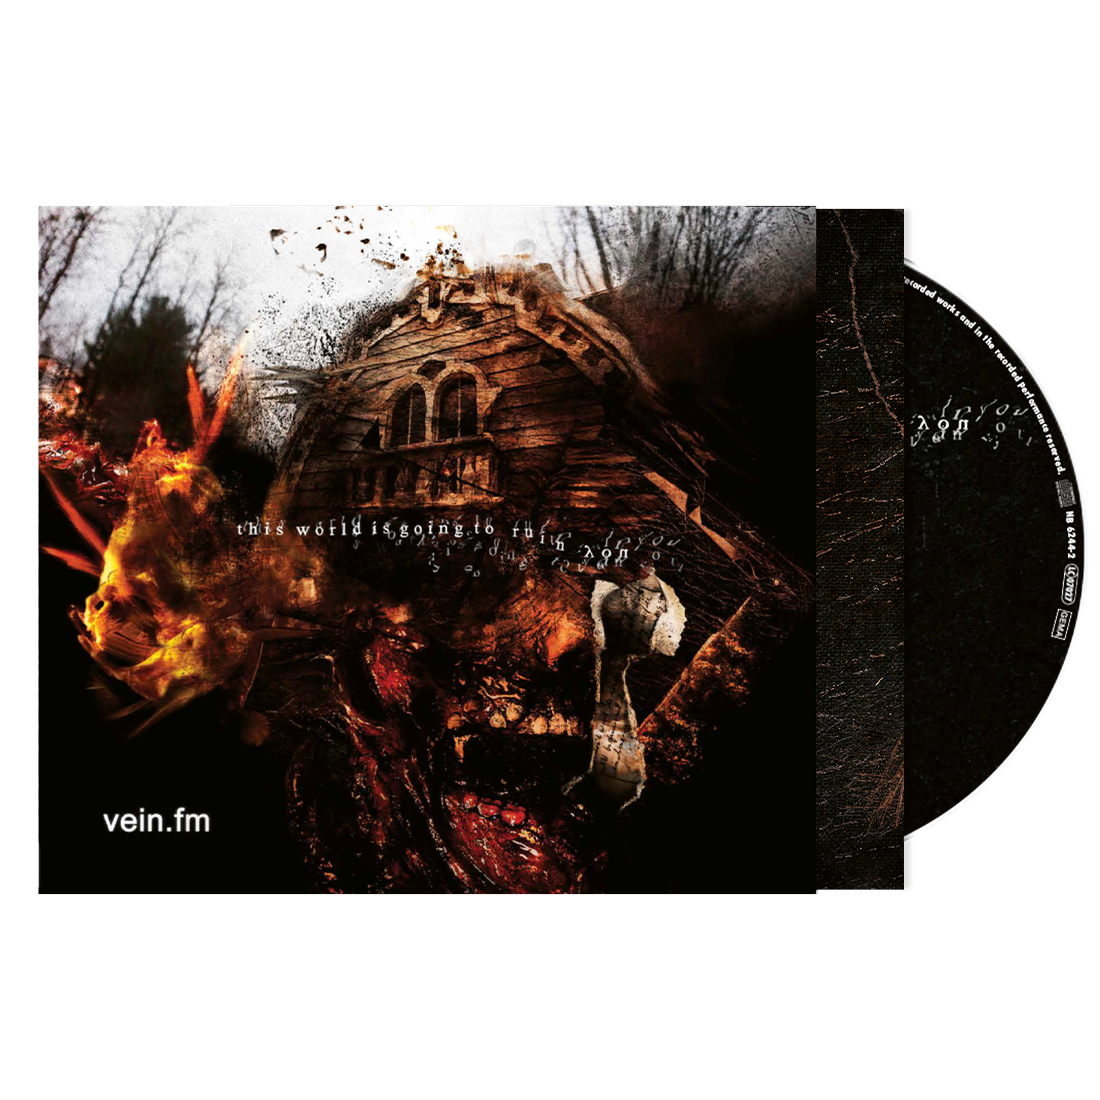 Vein.FM - The World Is Going To Ruin You: CD